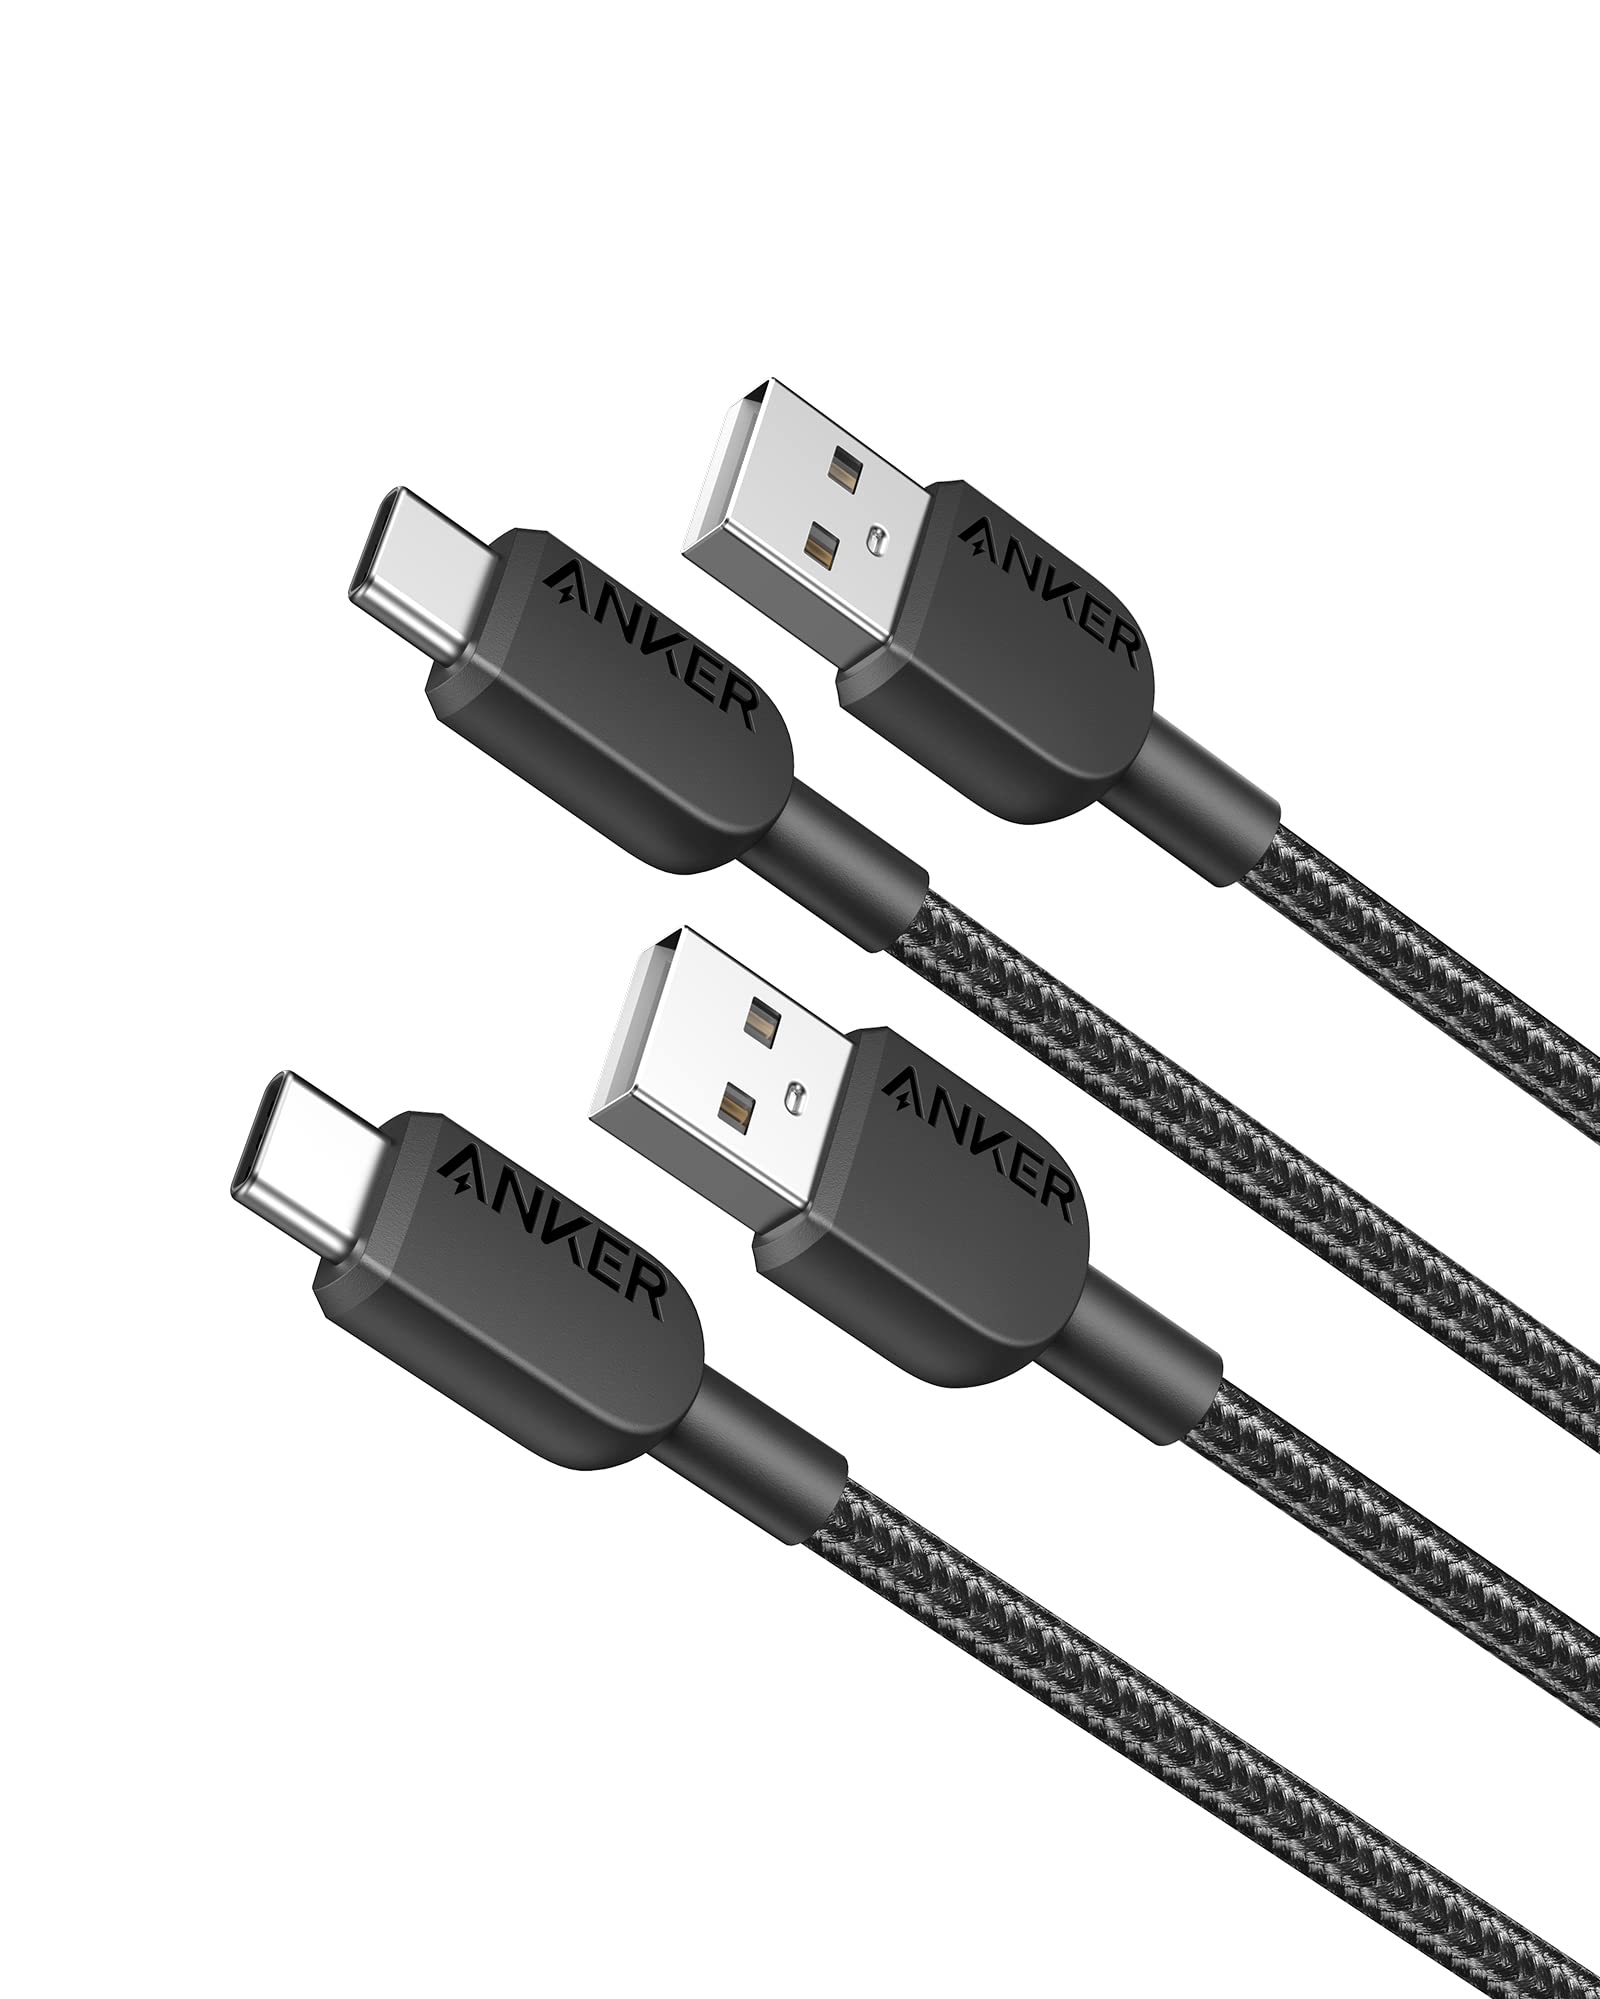 Anker USB C Cable, 2 Pack, 3ft 310 USB A to USB C/USB A to Type C Charger Cable $5.99